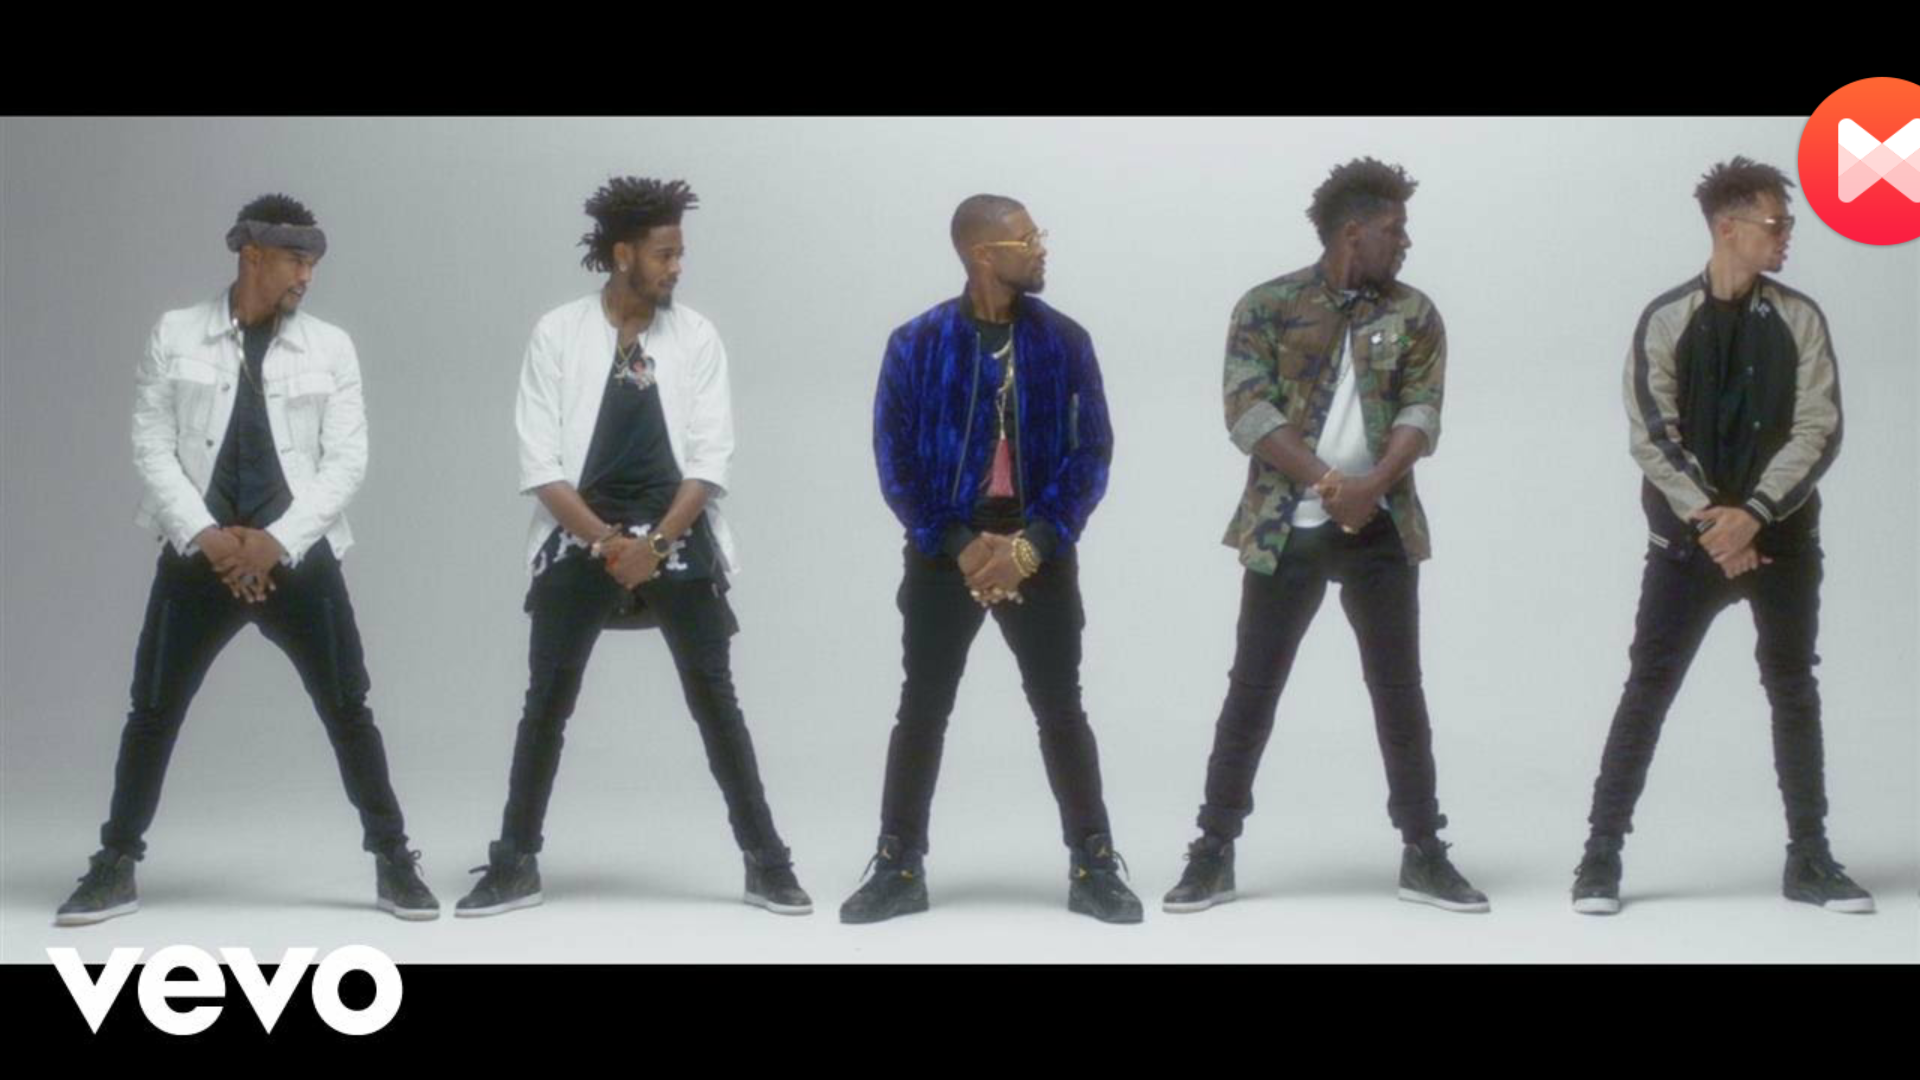 Usher Showcases Some Elaborate Dance Moves in “No Limit” Music Video with Young Thug1920 x 1080